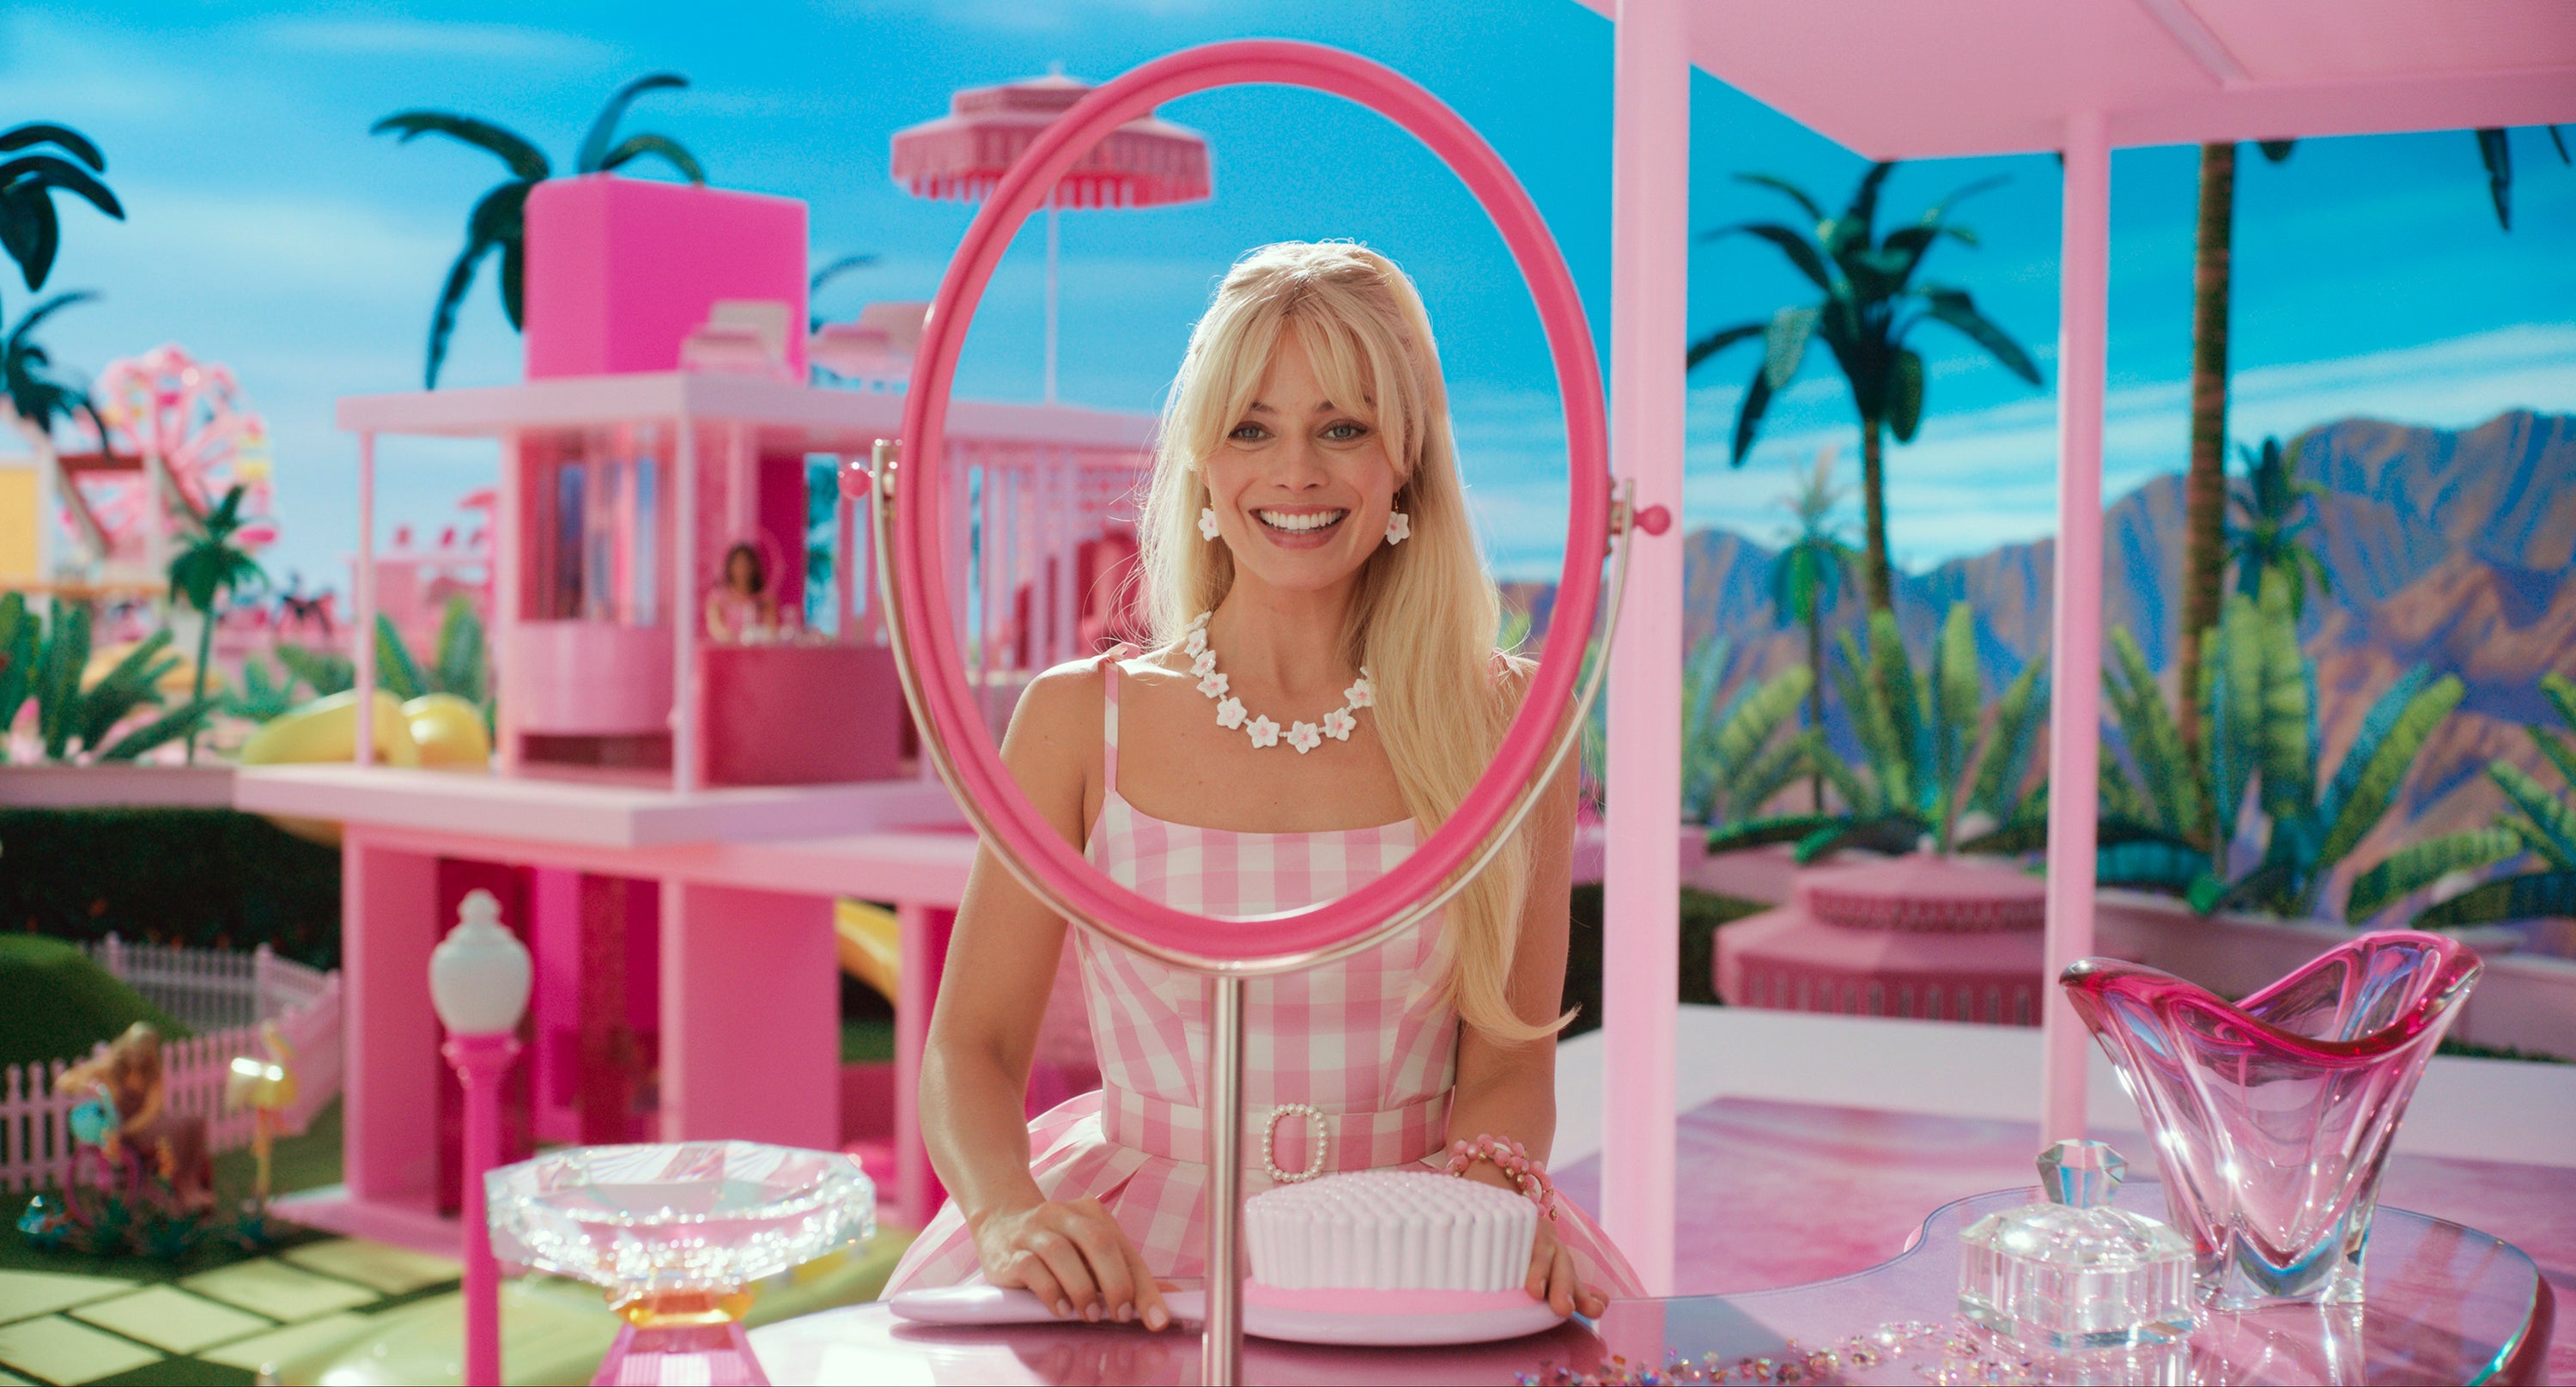 The ‘Barbie’ movie hits cinemas on 21 July in the US and UK